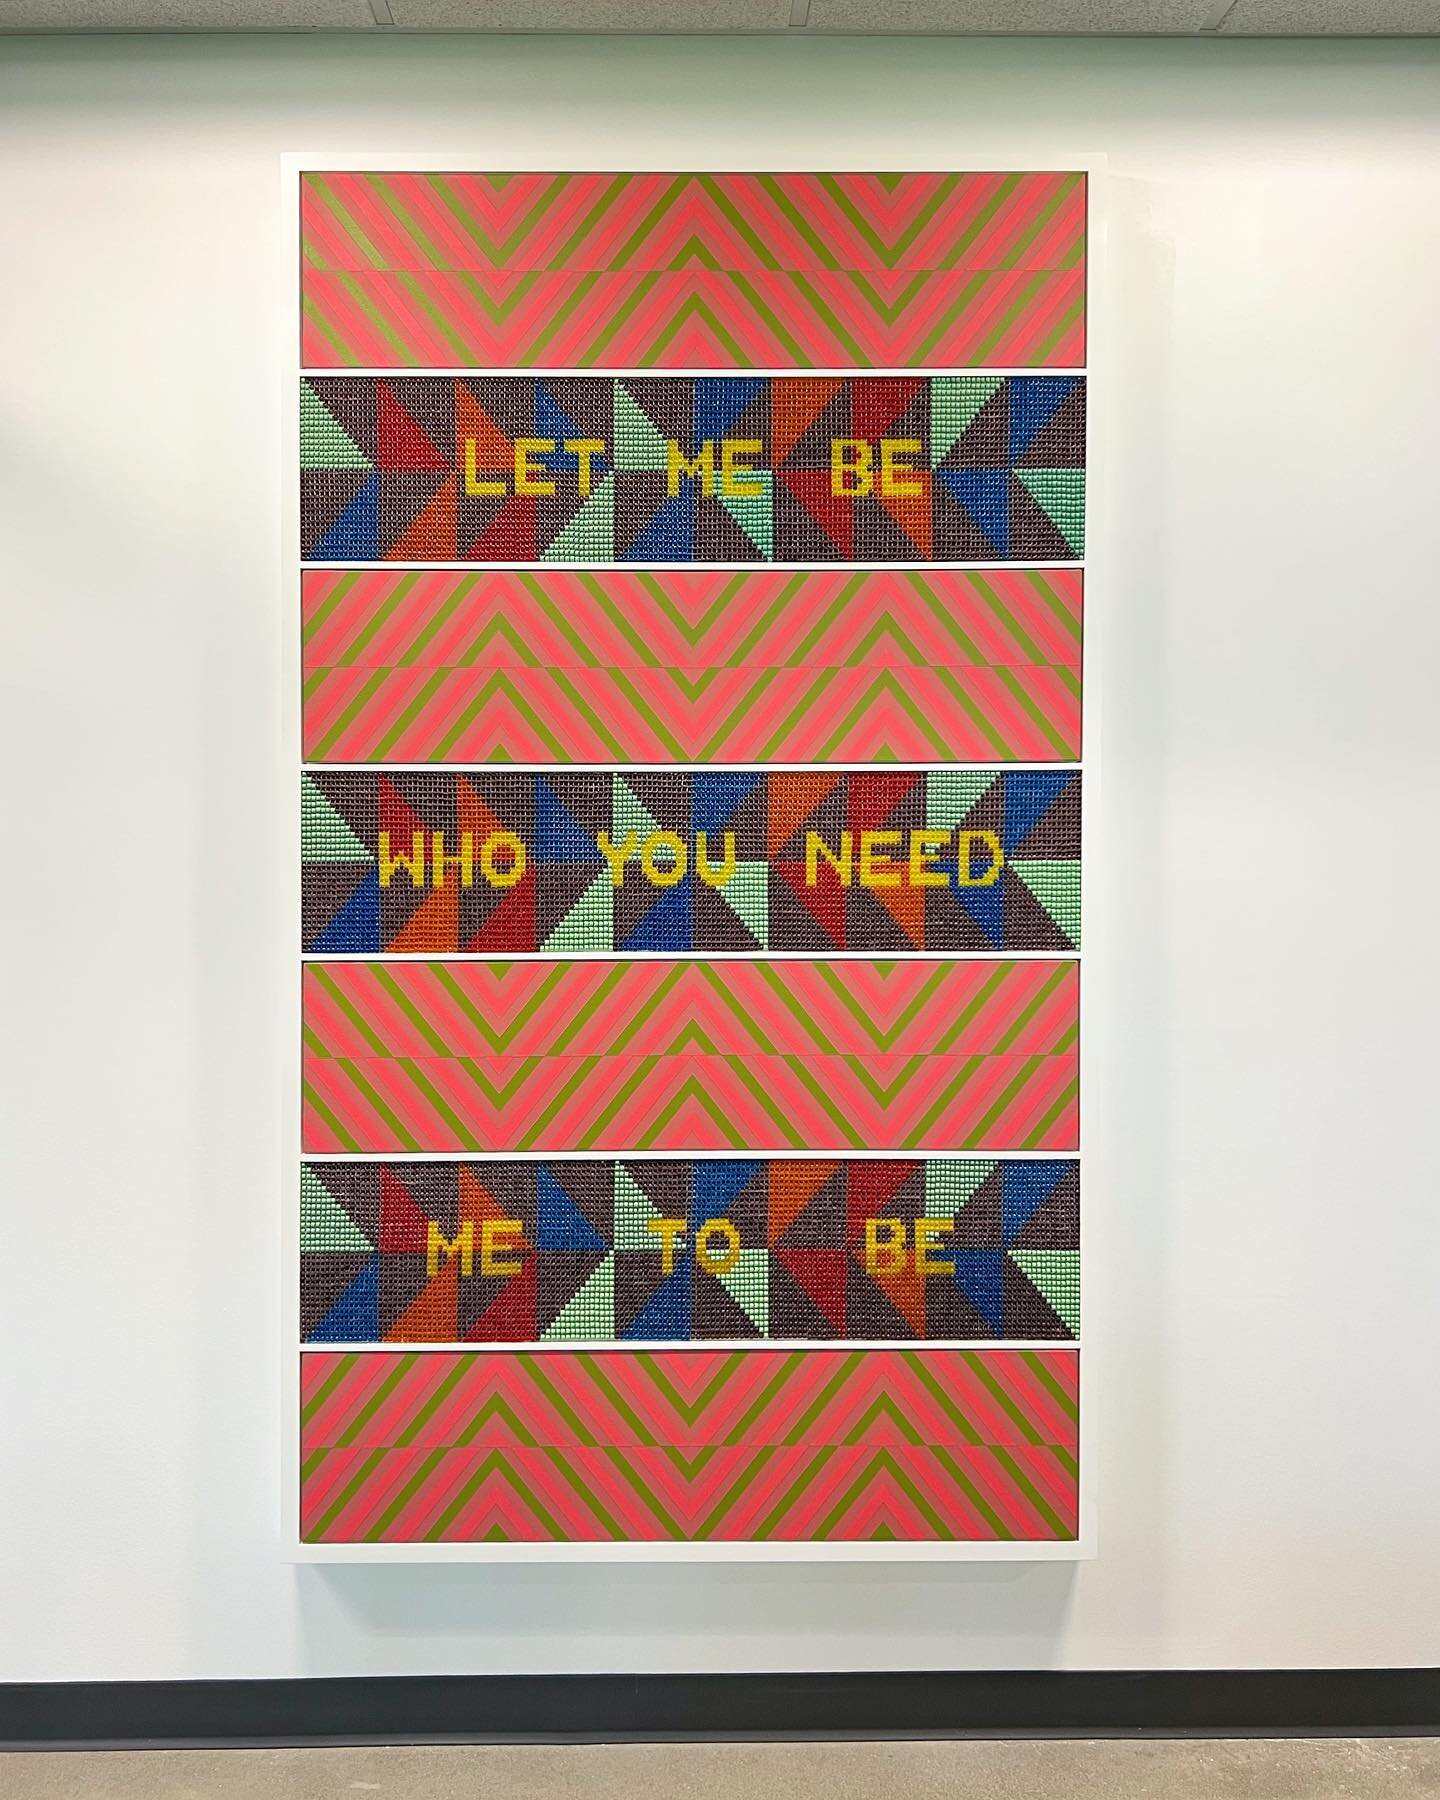 This work was recently acquired and installed for one of our favorite projects we are working on this year. LET ME BE WHO YOU NEED ME TO BE by @jeffrune gives us all of the feelings. 

Thank you to @kavigupta_ and @arynfoland for helping us place thi